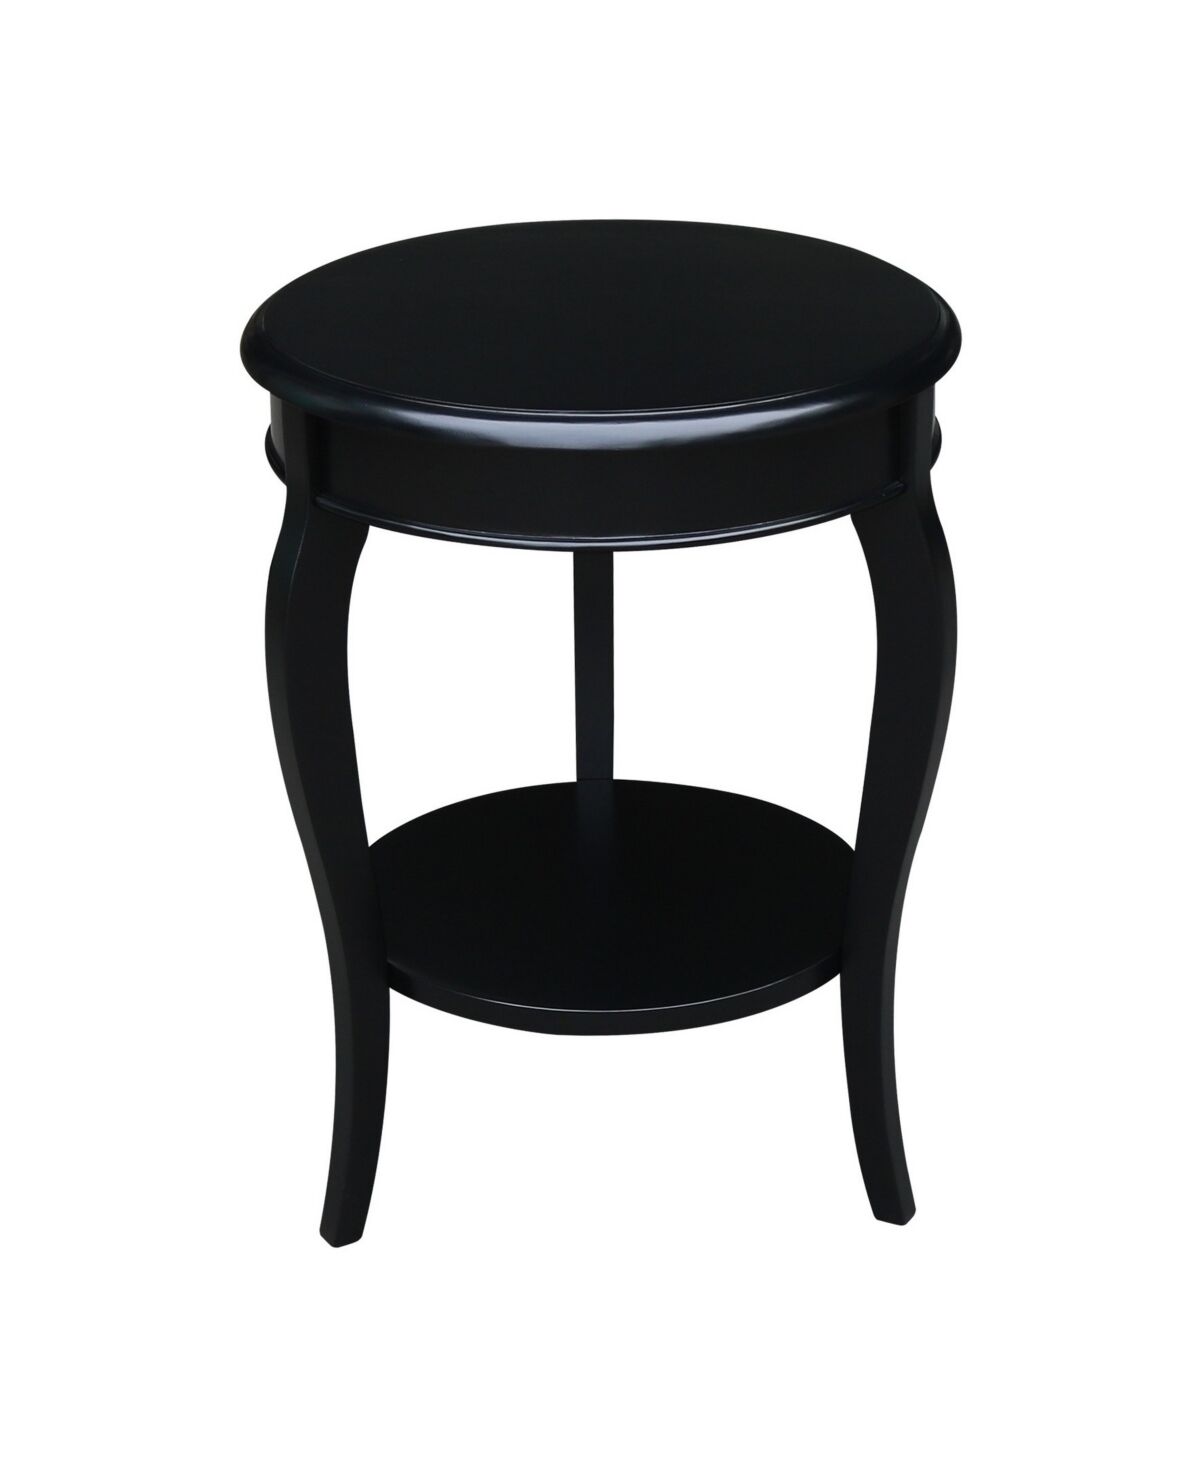 International Concepts Cambria Round End Table - Black